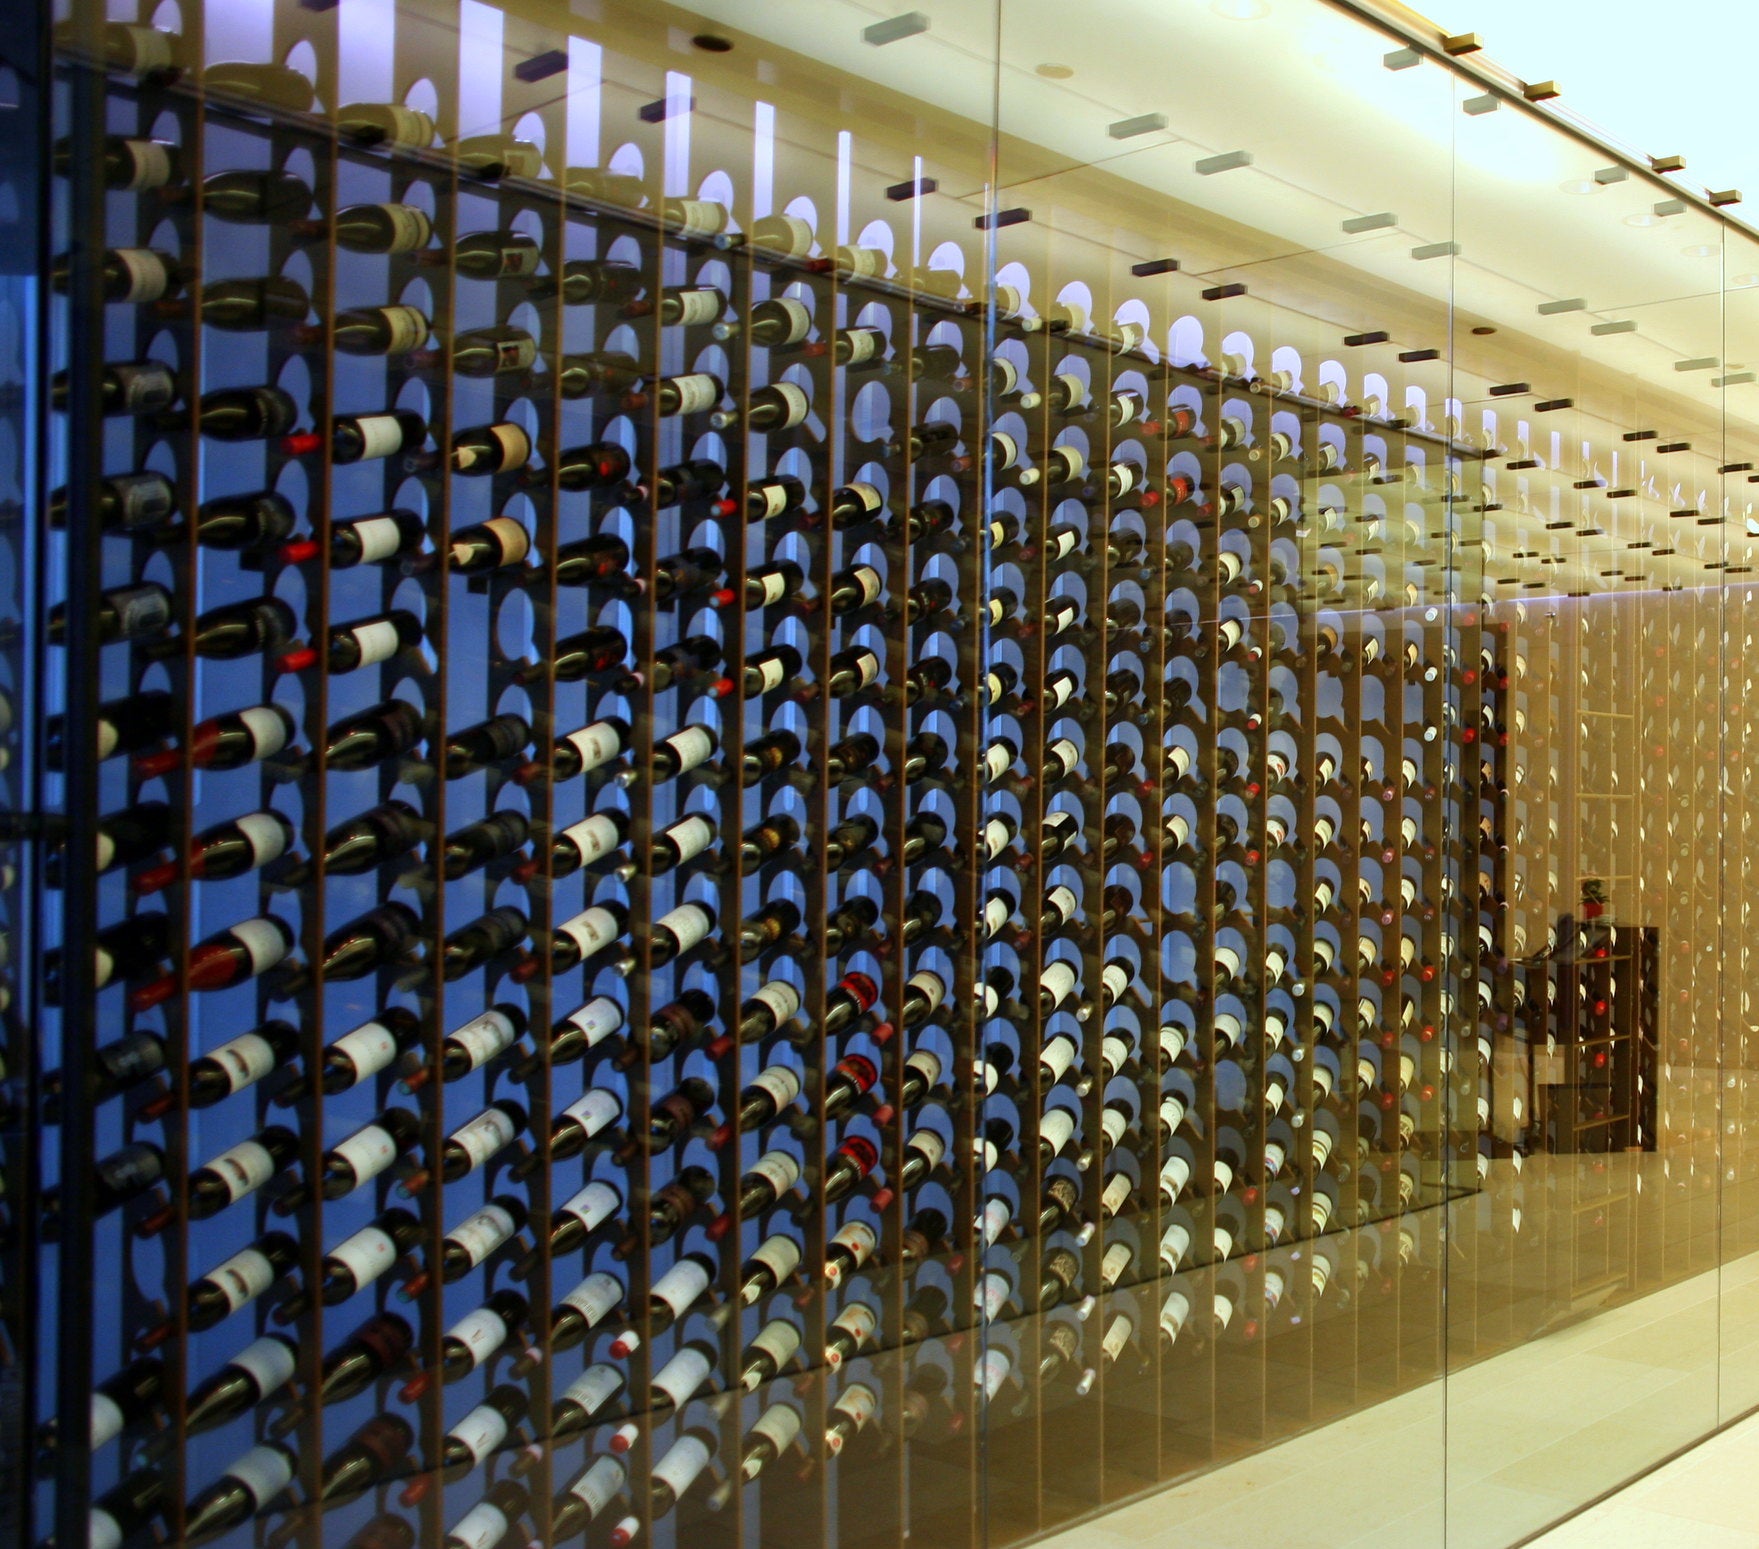 Wine bottles in a wall-mounted wine rack enclosed in glass